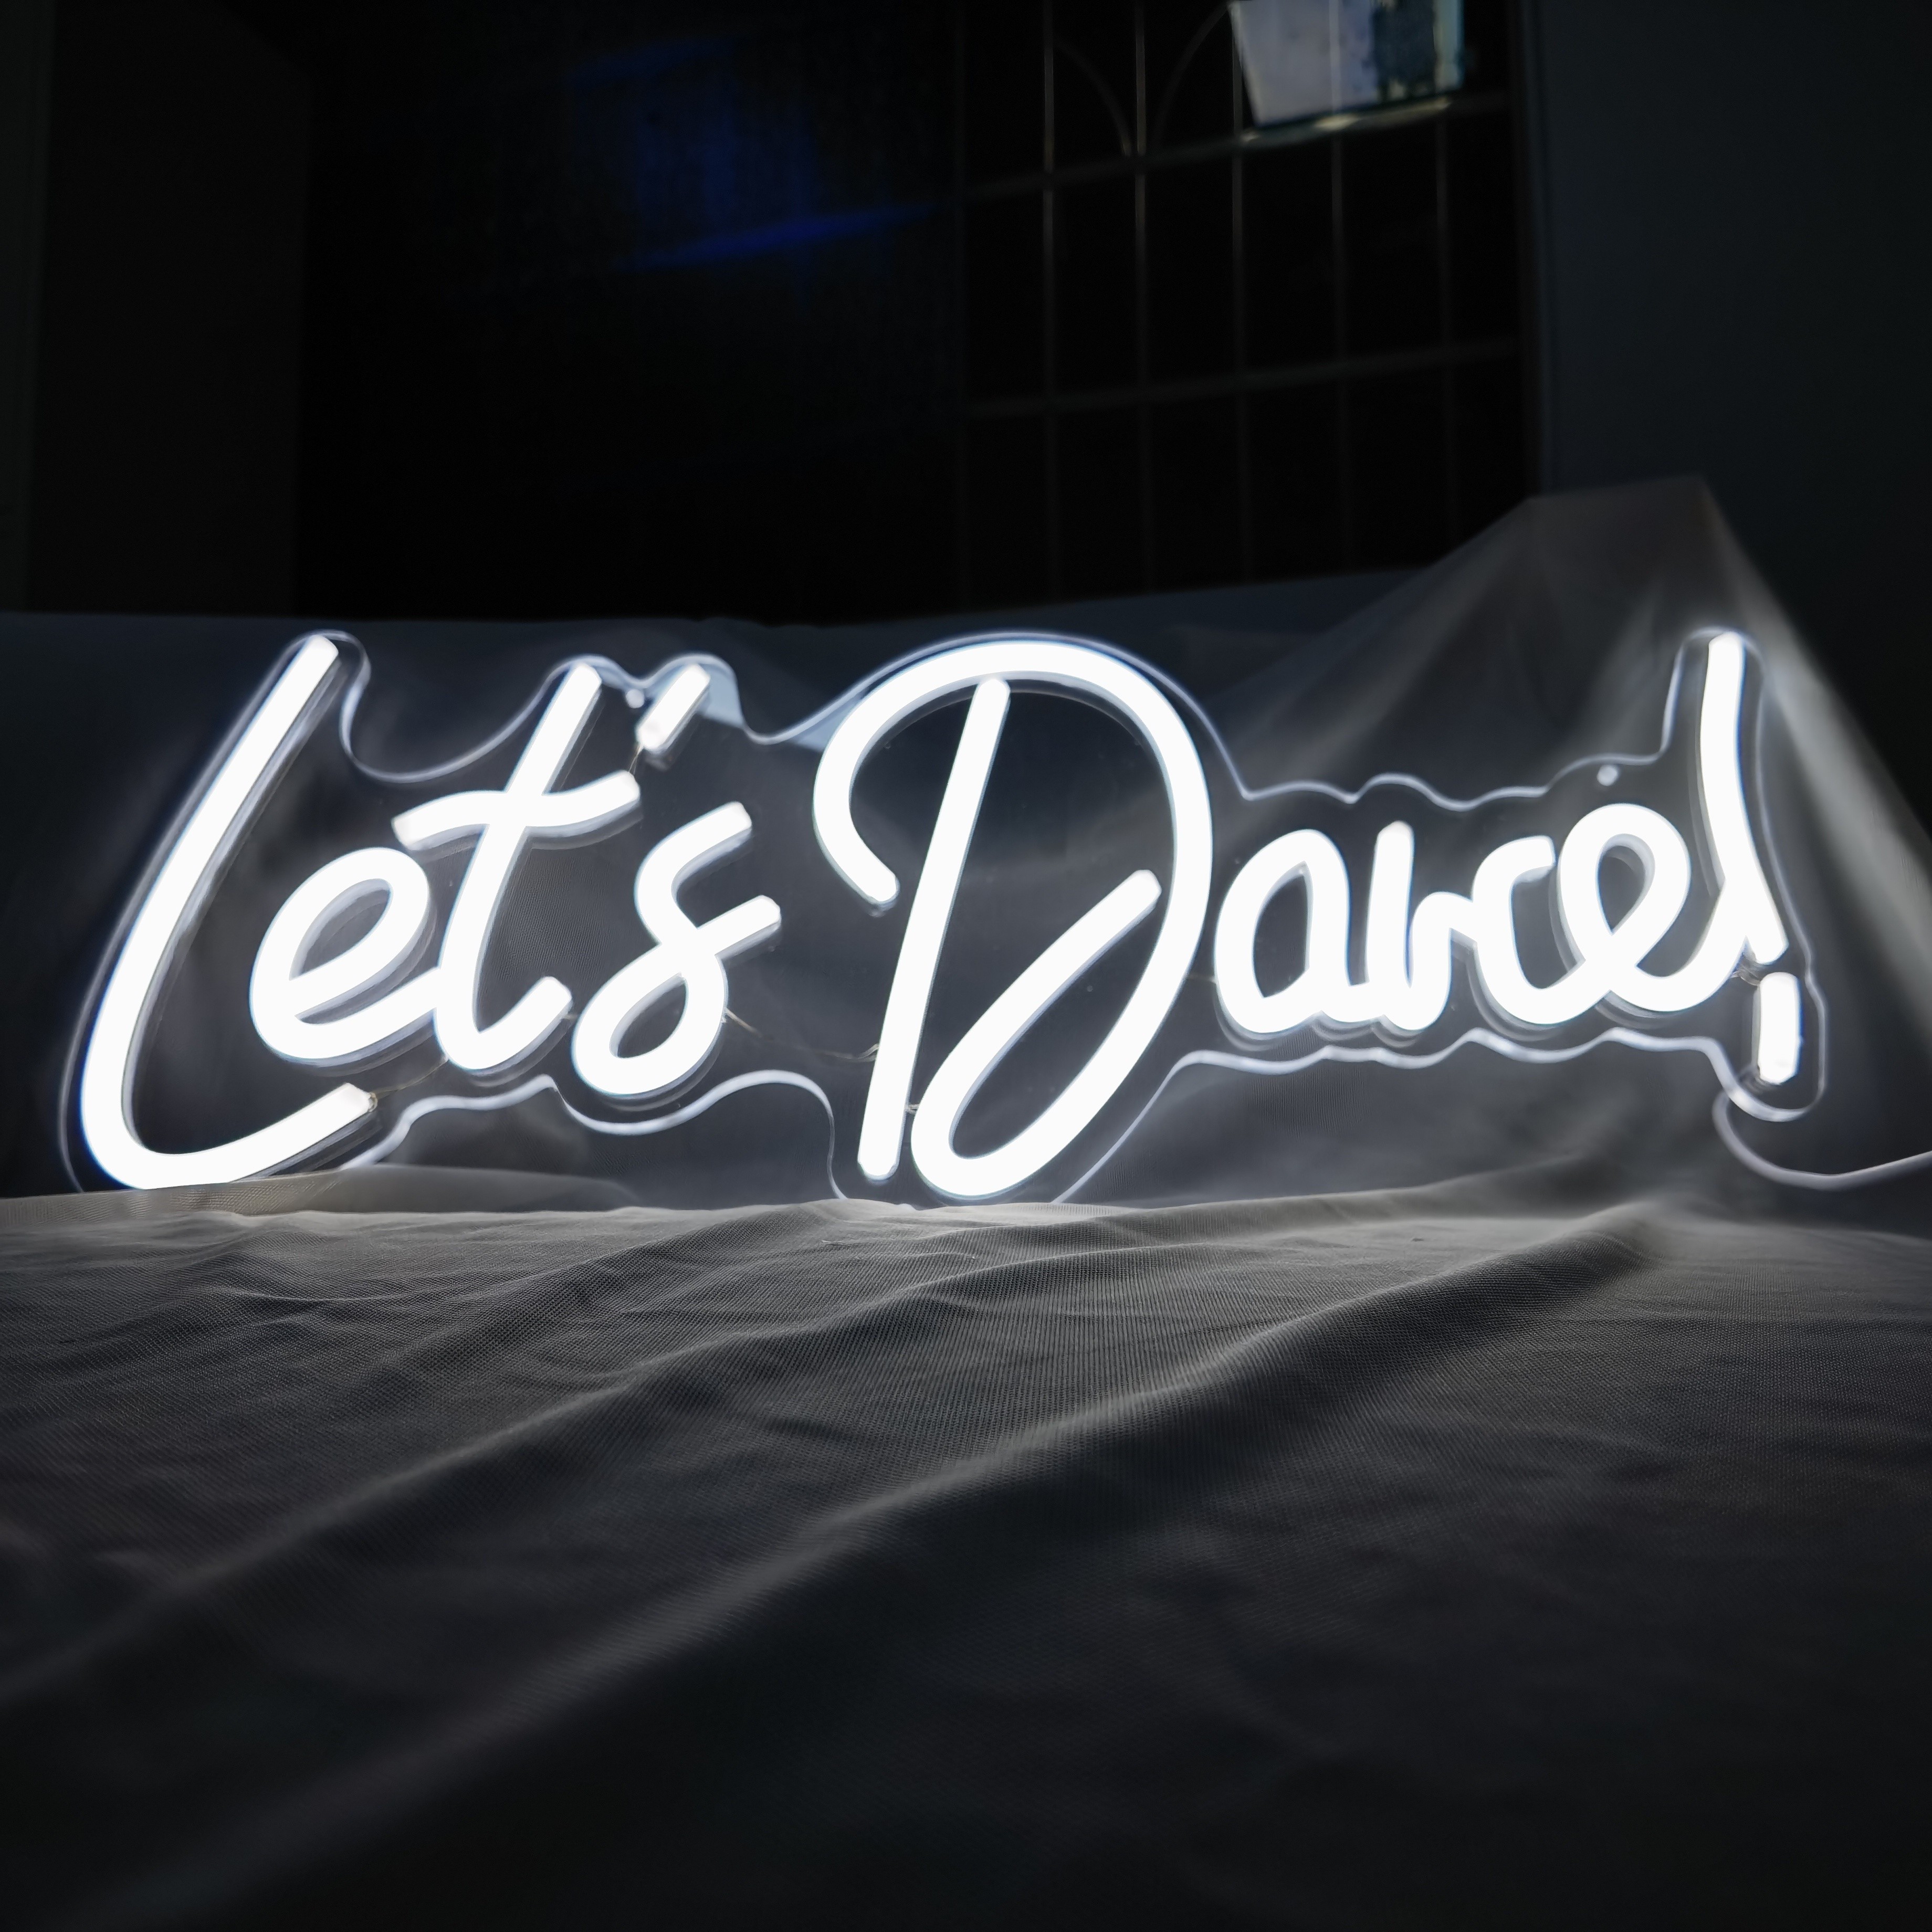 Dance Neon Sign Let's Dance Led Light for Party